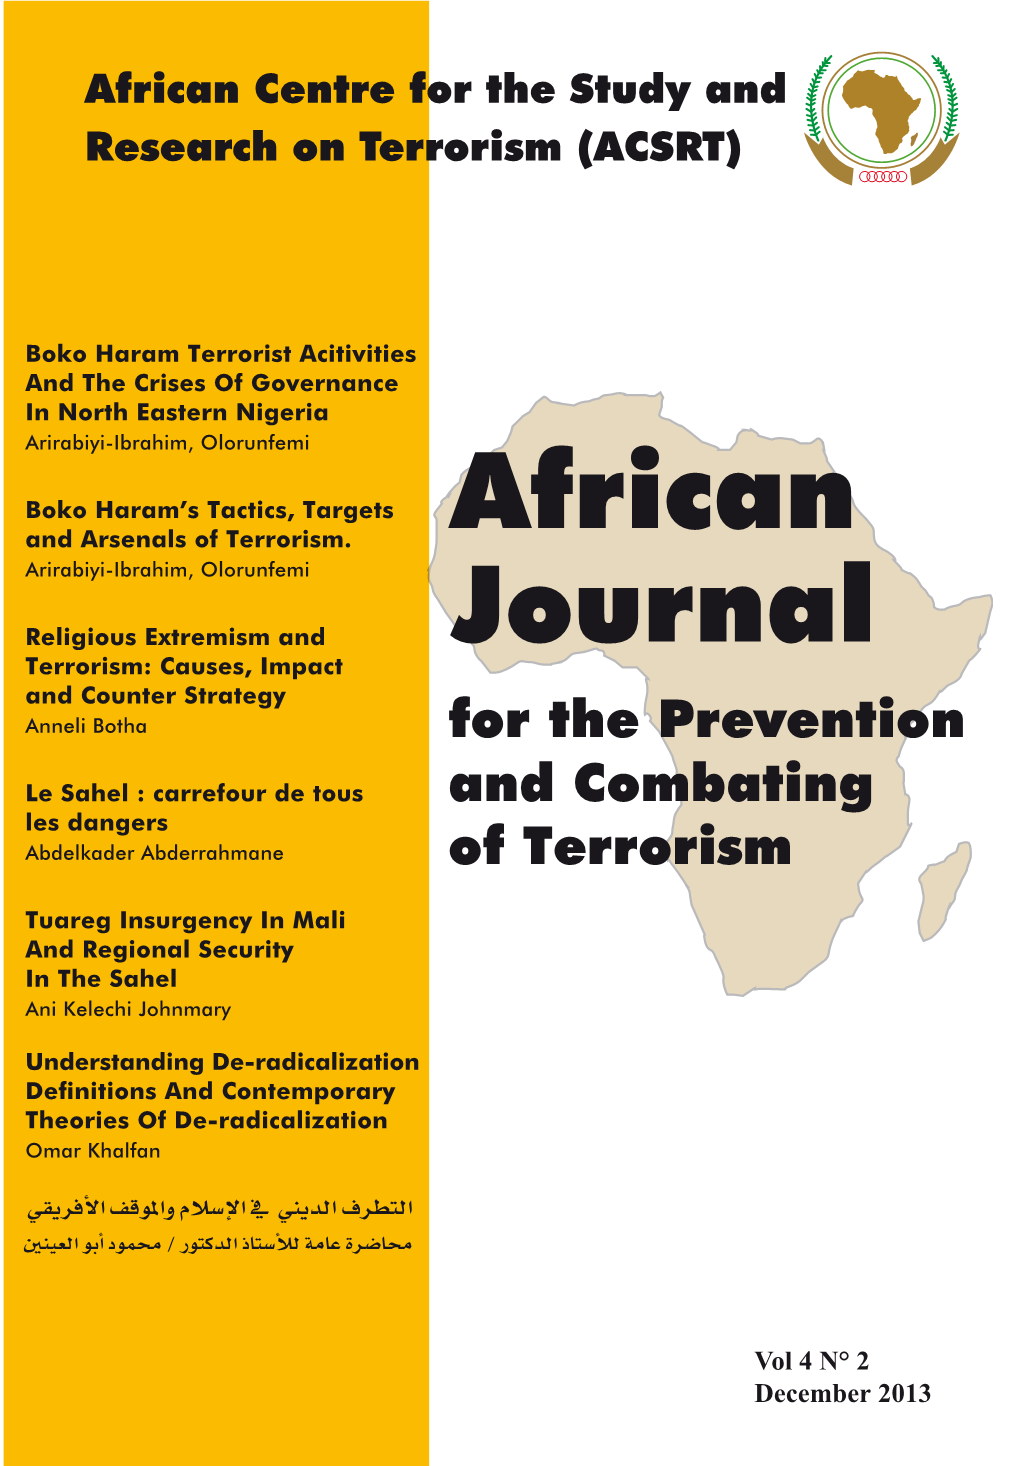 African Journal for the Prevention and Combating of Terrorism